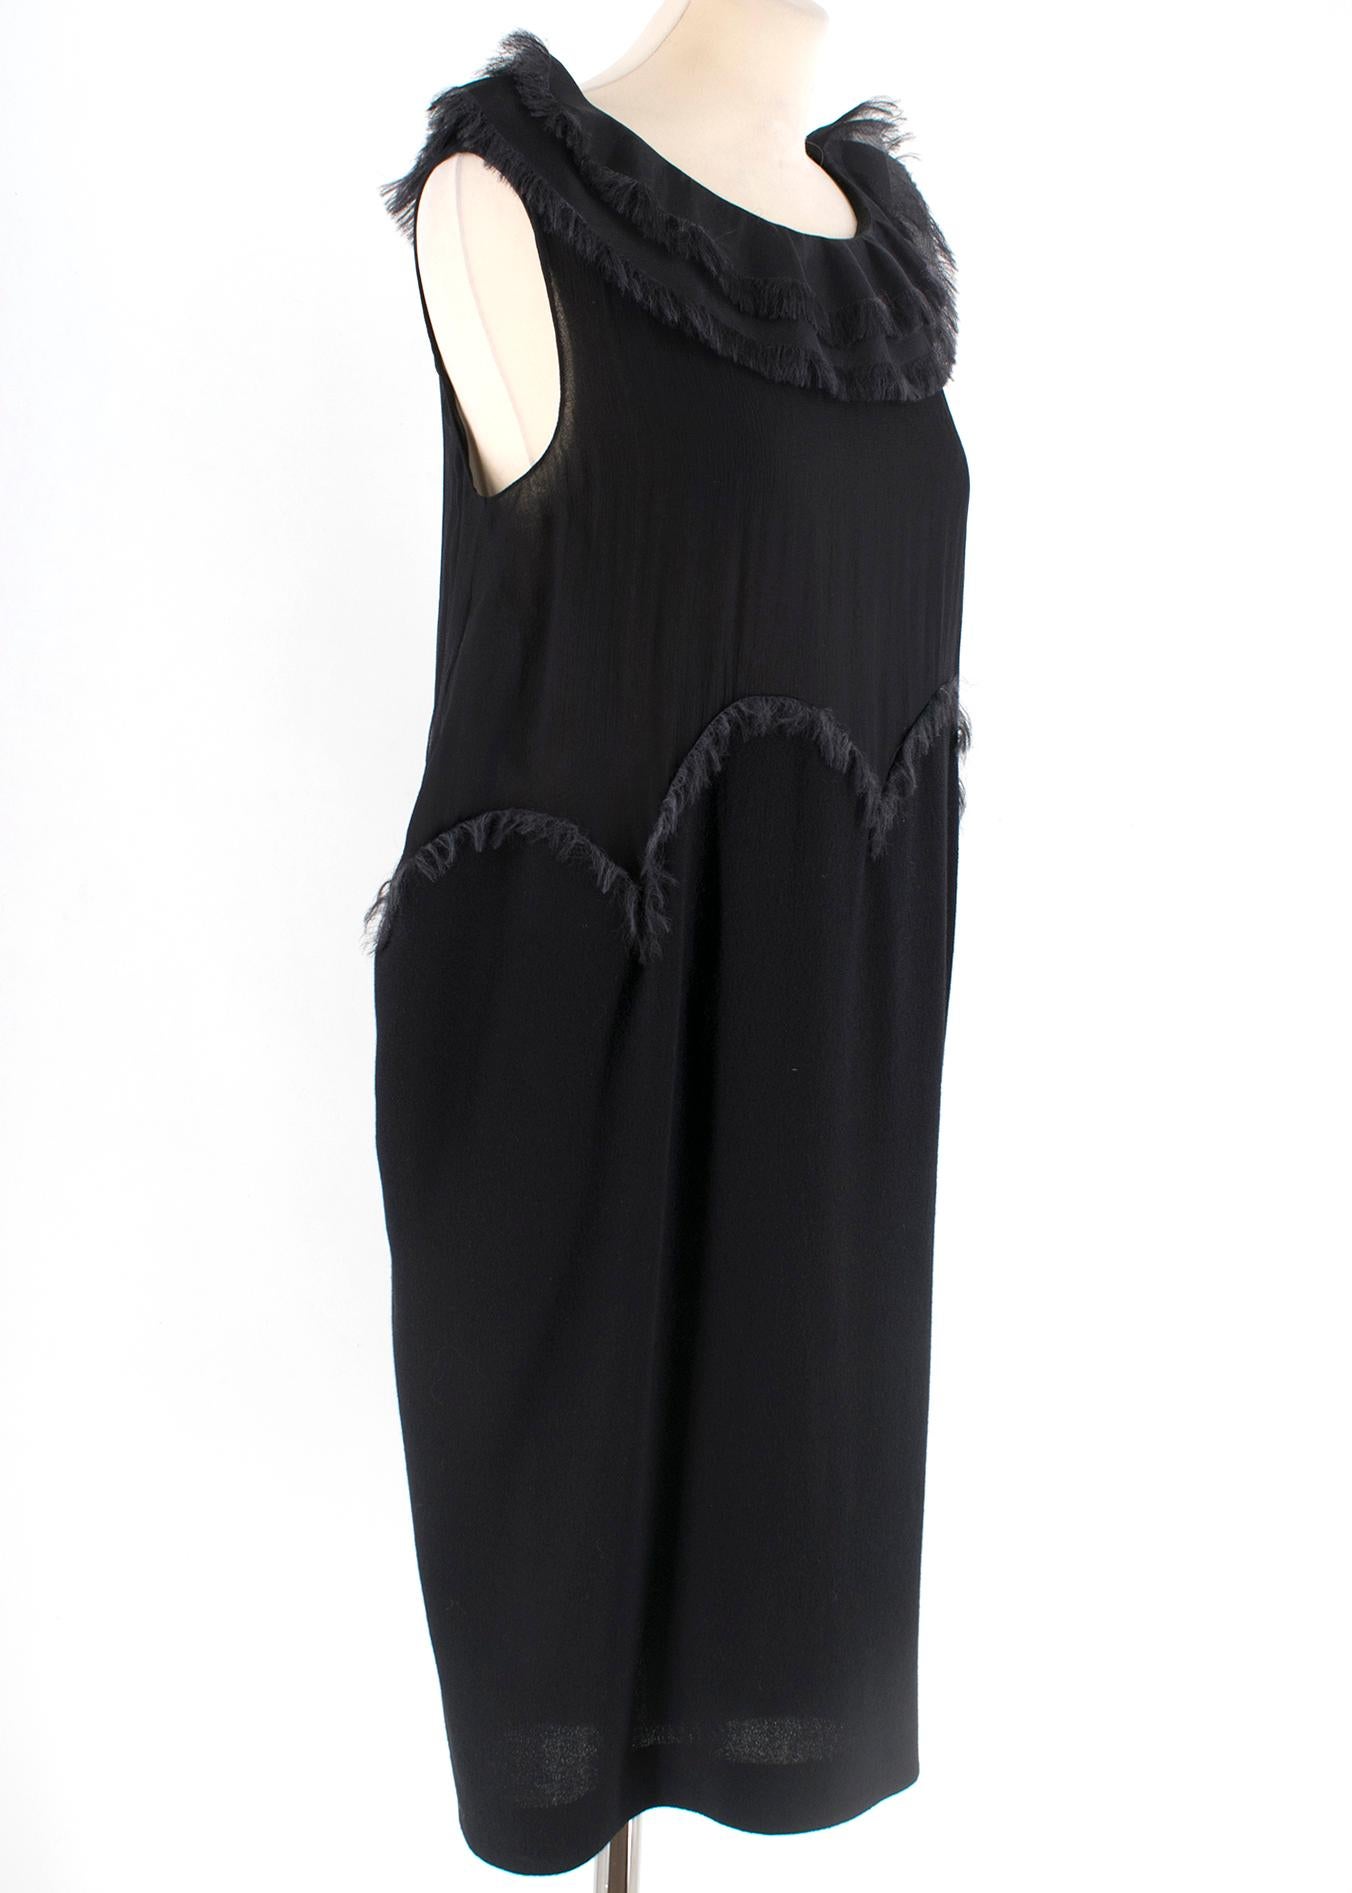 Yves Saint Laurent Black Chiffon Trim Mini Dress

-Back zip(in a good condition)
-Feather Neck and stomach trim
-Tulip shape 

Please note, these items are pre-owned and may show signs of being stored even when unworn and unused. This is reflected